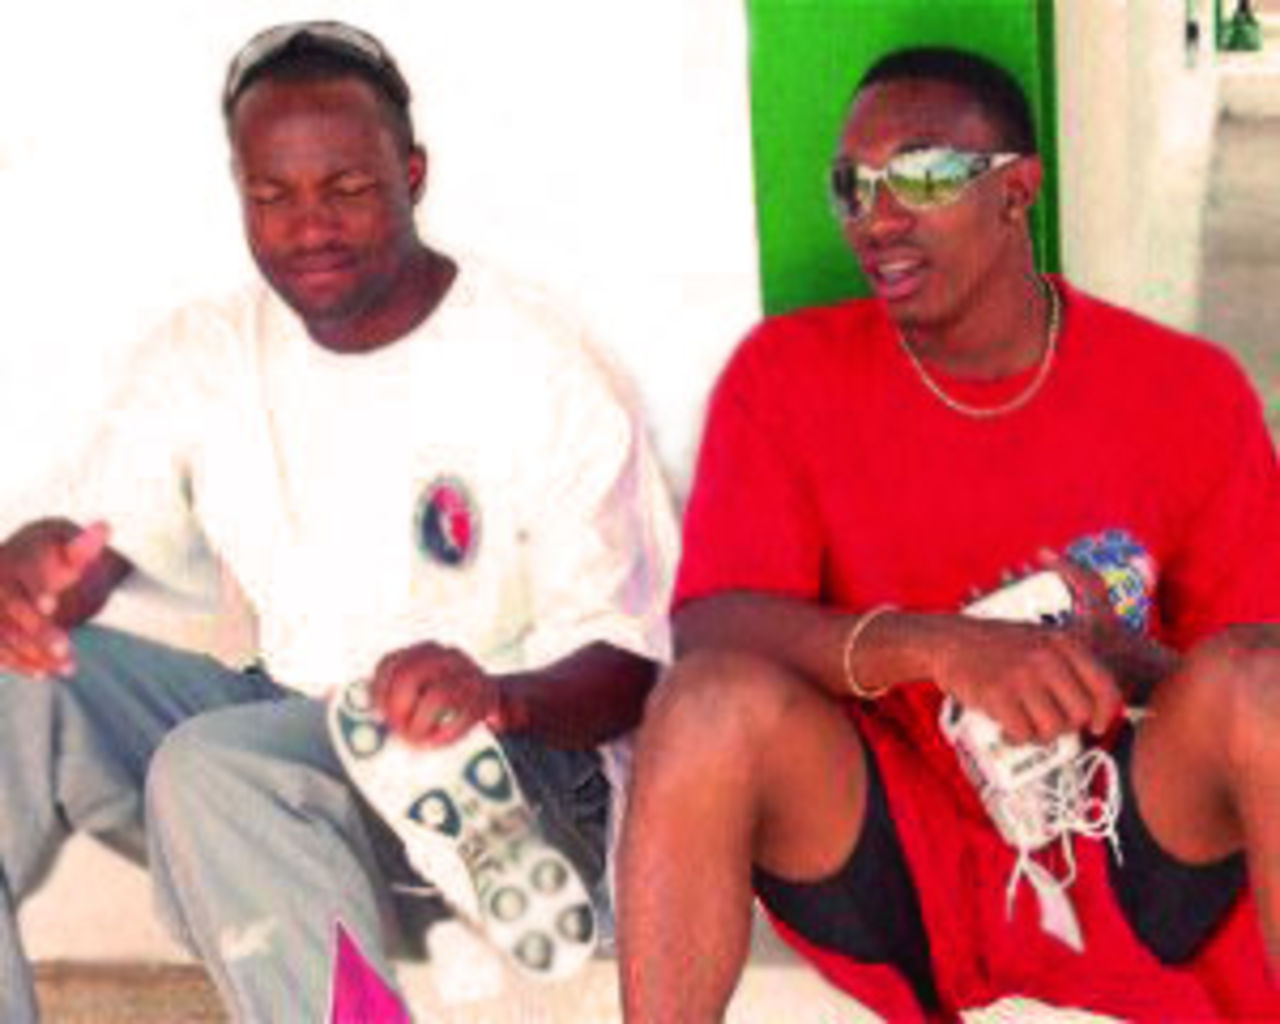 Brian Lara and Dwayne Bravo relax ahead of the Carib Beer Challenge final against Barbados, Gilbert Park, February 21, 2007